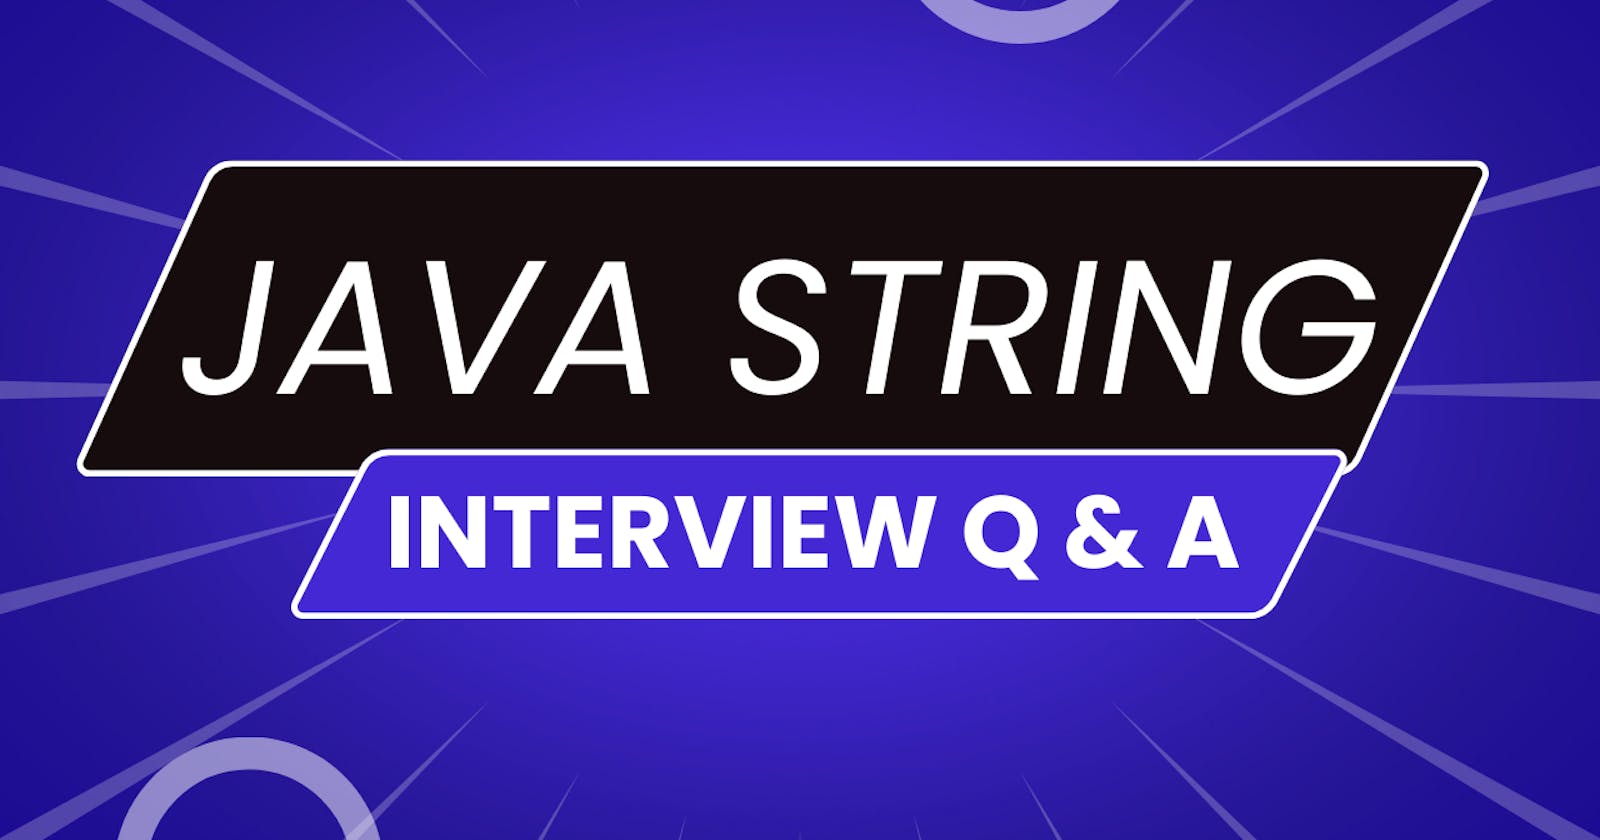 Top String Interview Questions & Answers